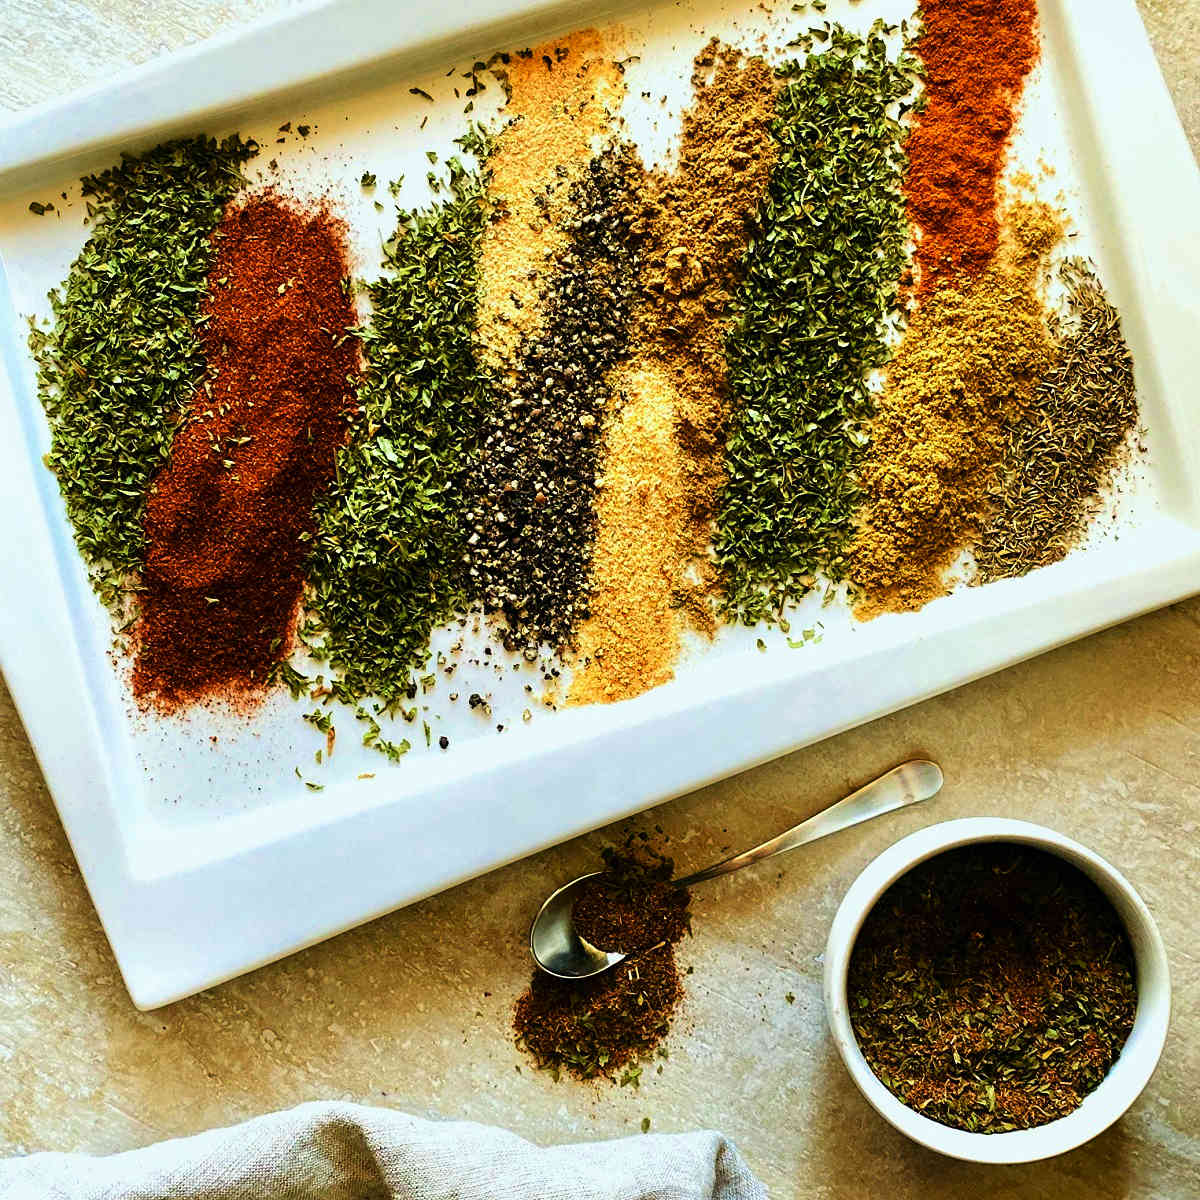 Tempero baiano brazilian spices layered next to each other on a white plate next to a dish of mixed seasoning and a spoonful